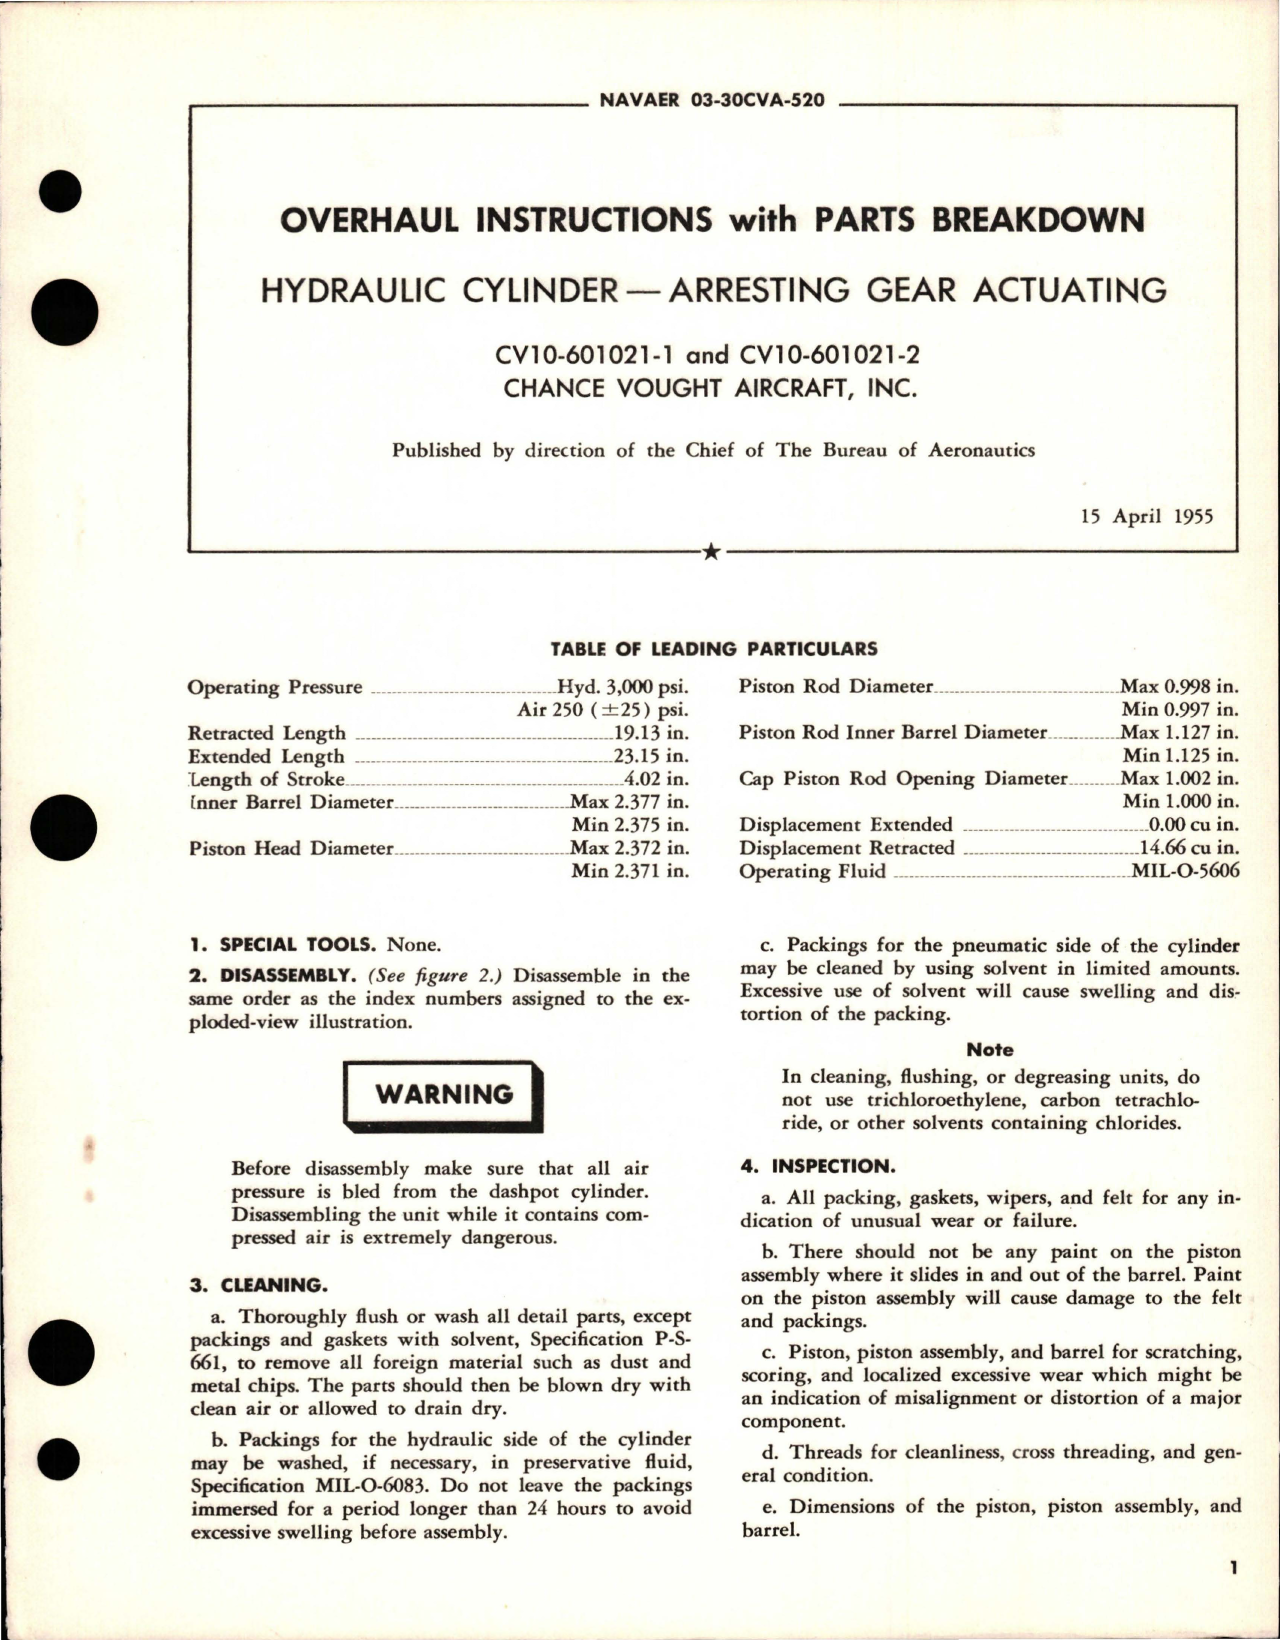 Sample page 1 from AirCorps Library document: Overhaul Instructions with Parts for Arresting Gear Actuating Hydraulic Cylinder - CV10-601021-1, CV10-601021-2